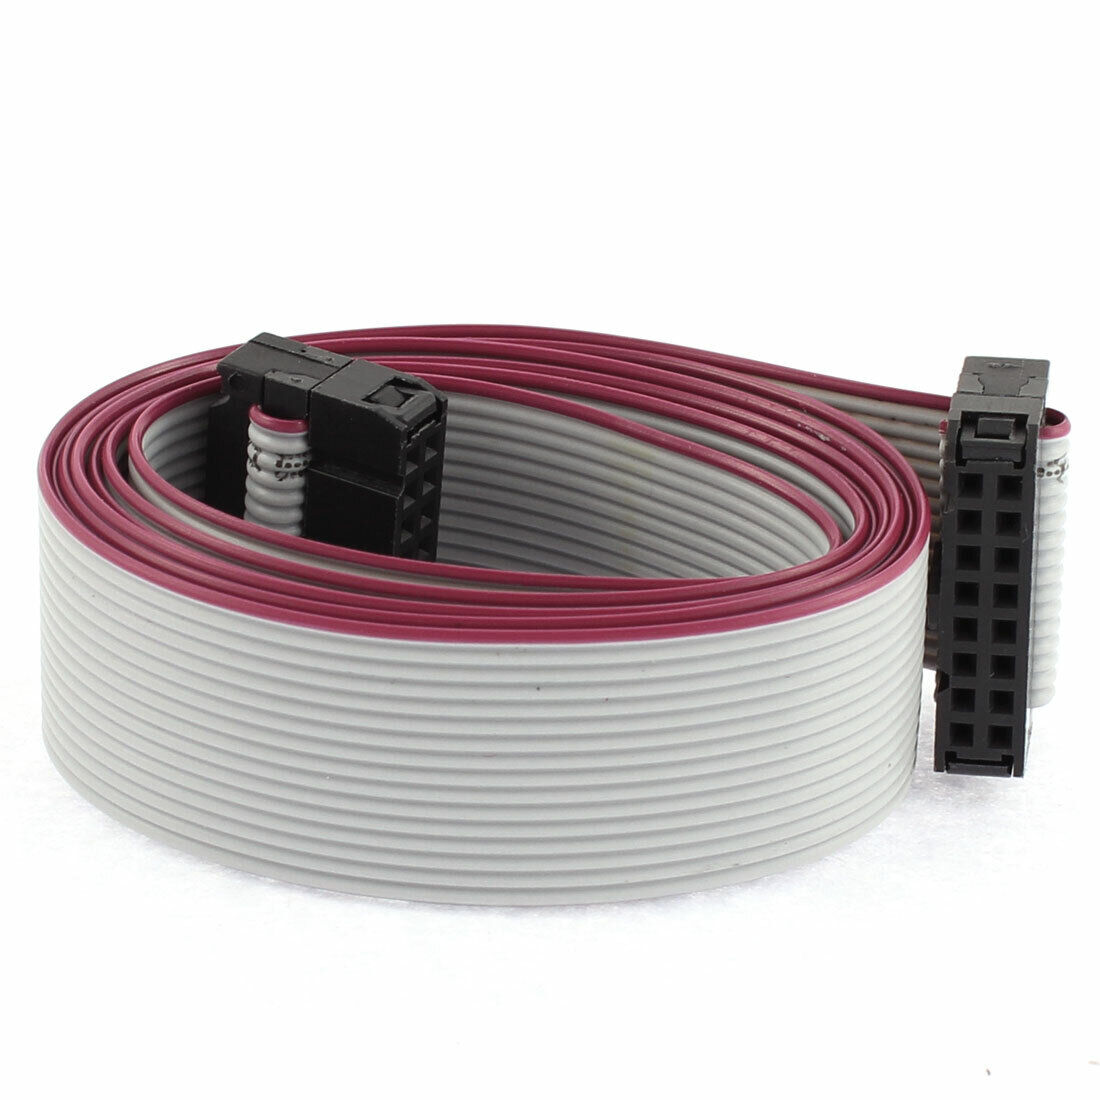 2.54mm Pitch 2 x 8 Pin 16 Pin 16 Wire IDC Flat Ribbon Cable 100cm Length